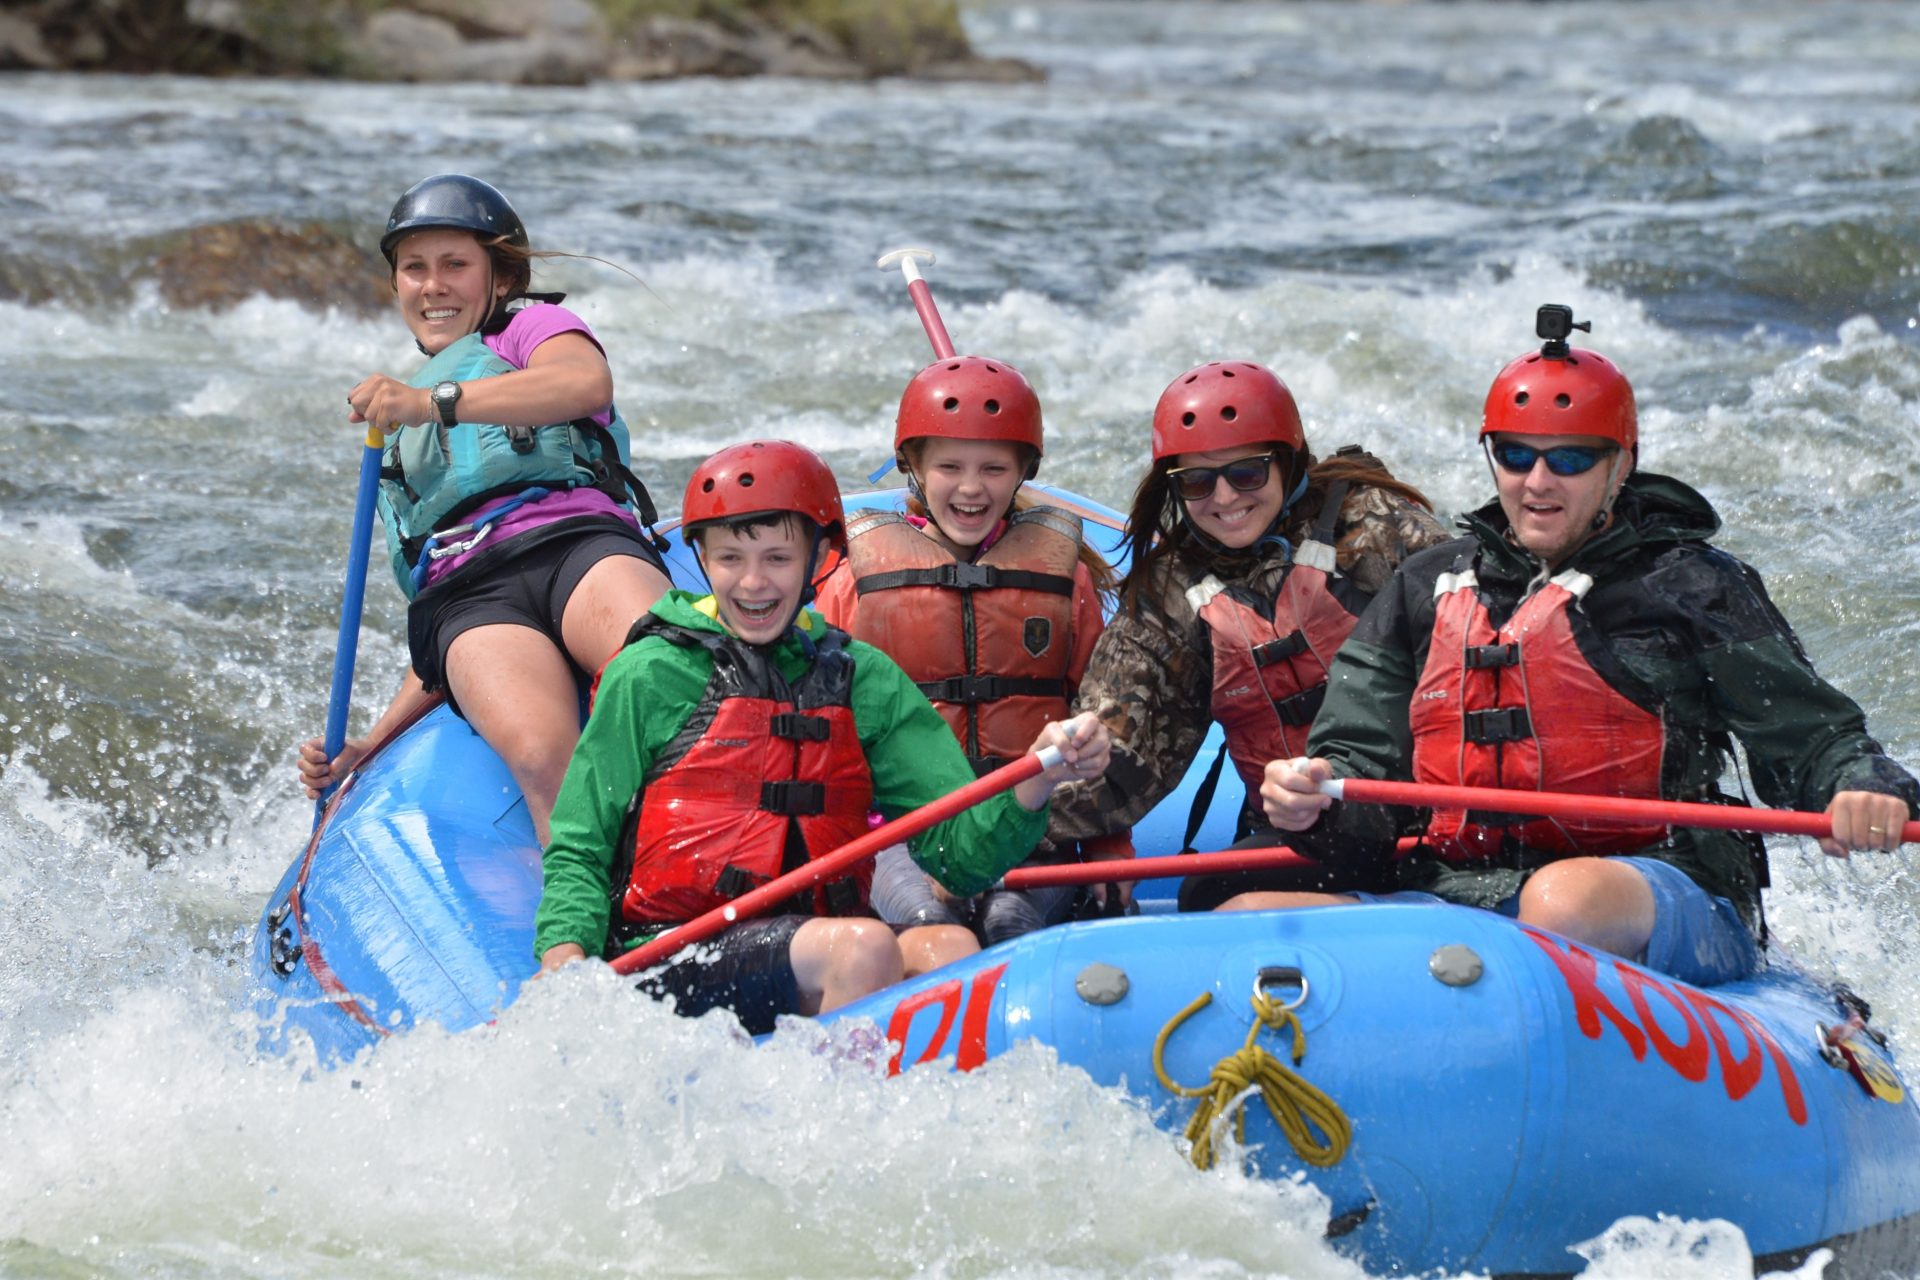 A tour group engaged in class 5 whitewater rafting Colorado